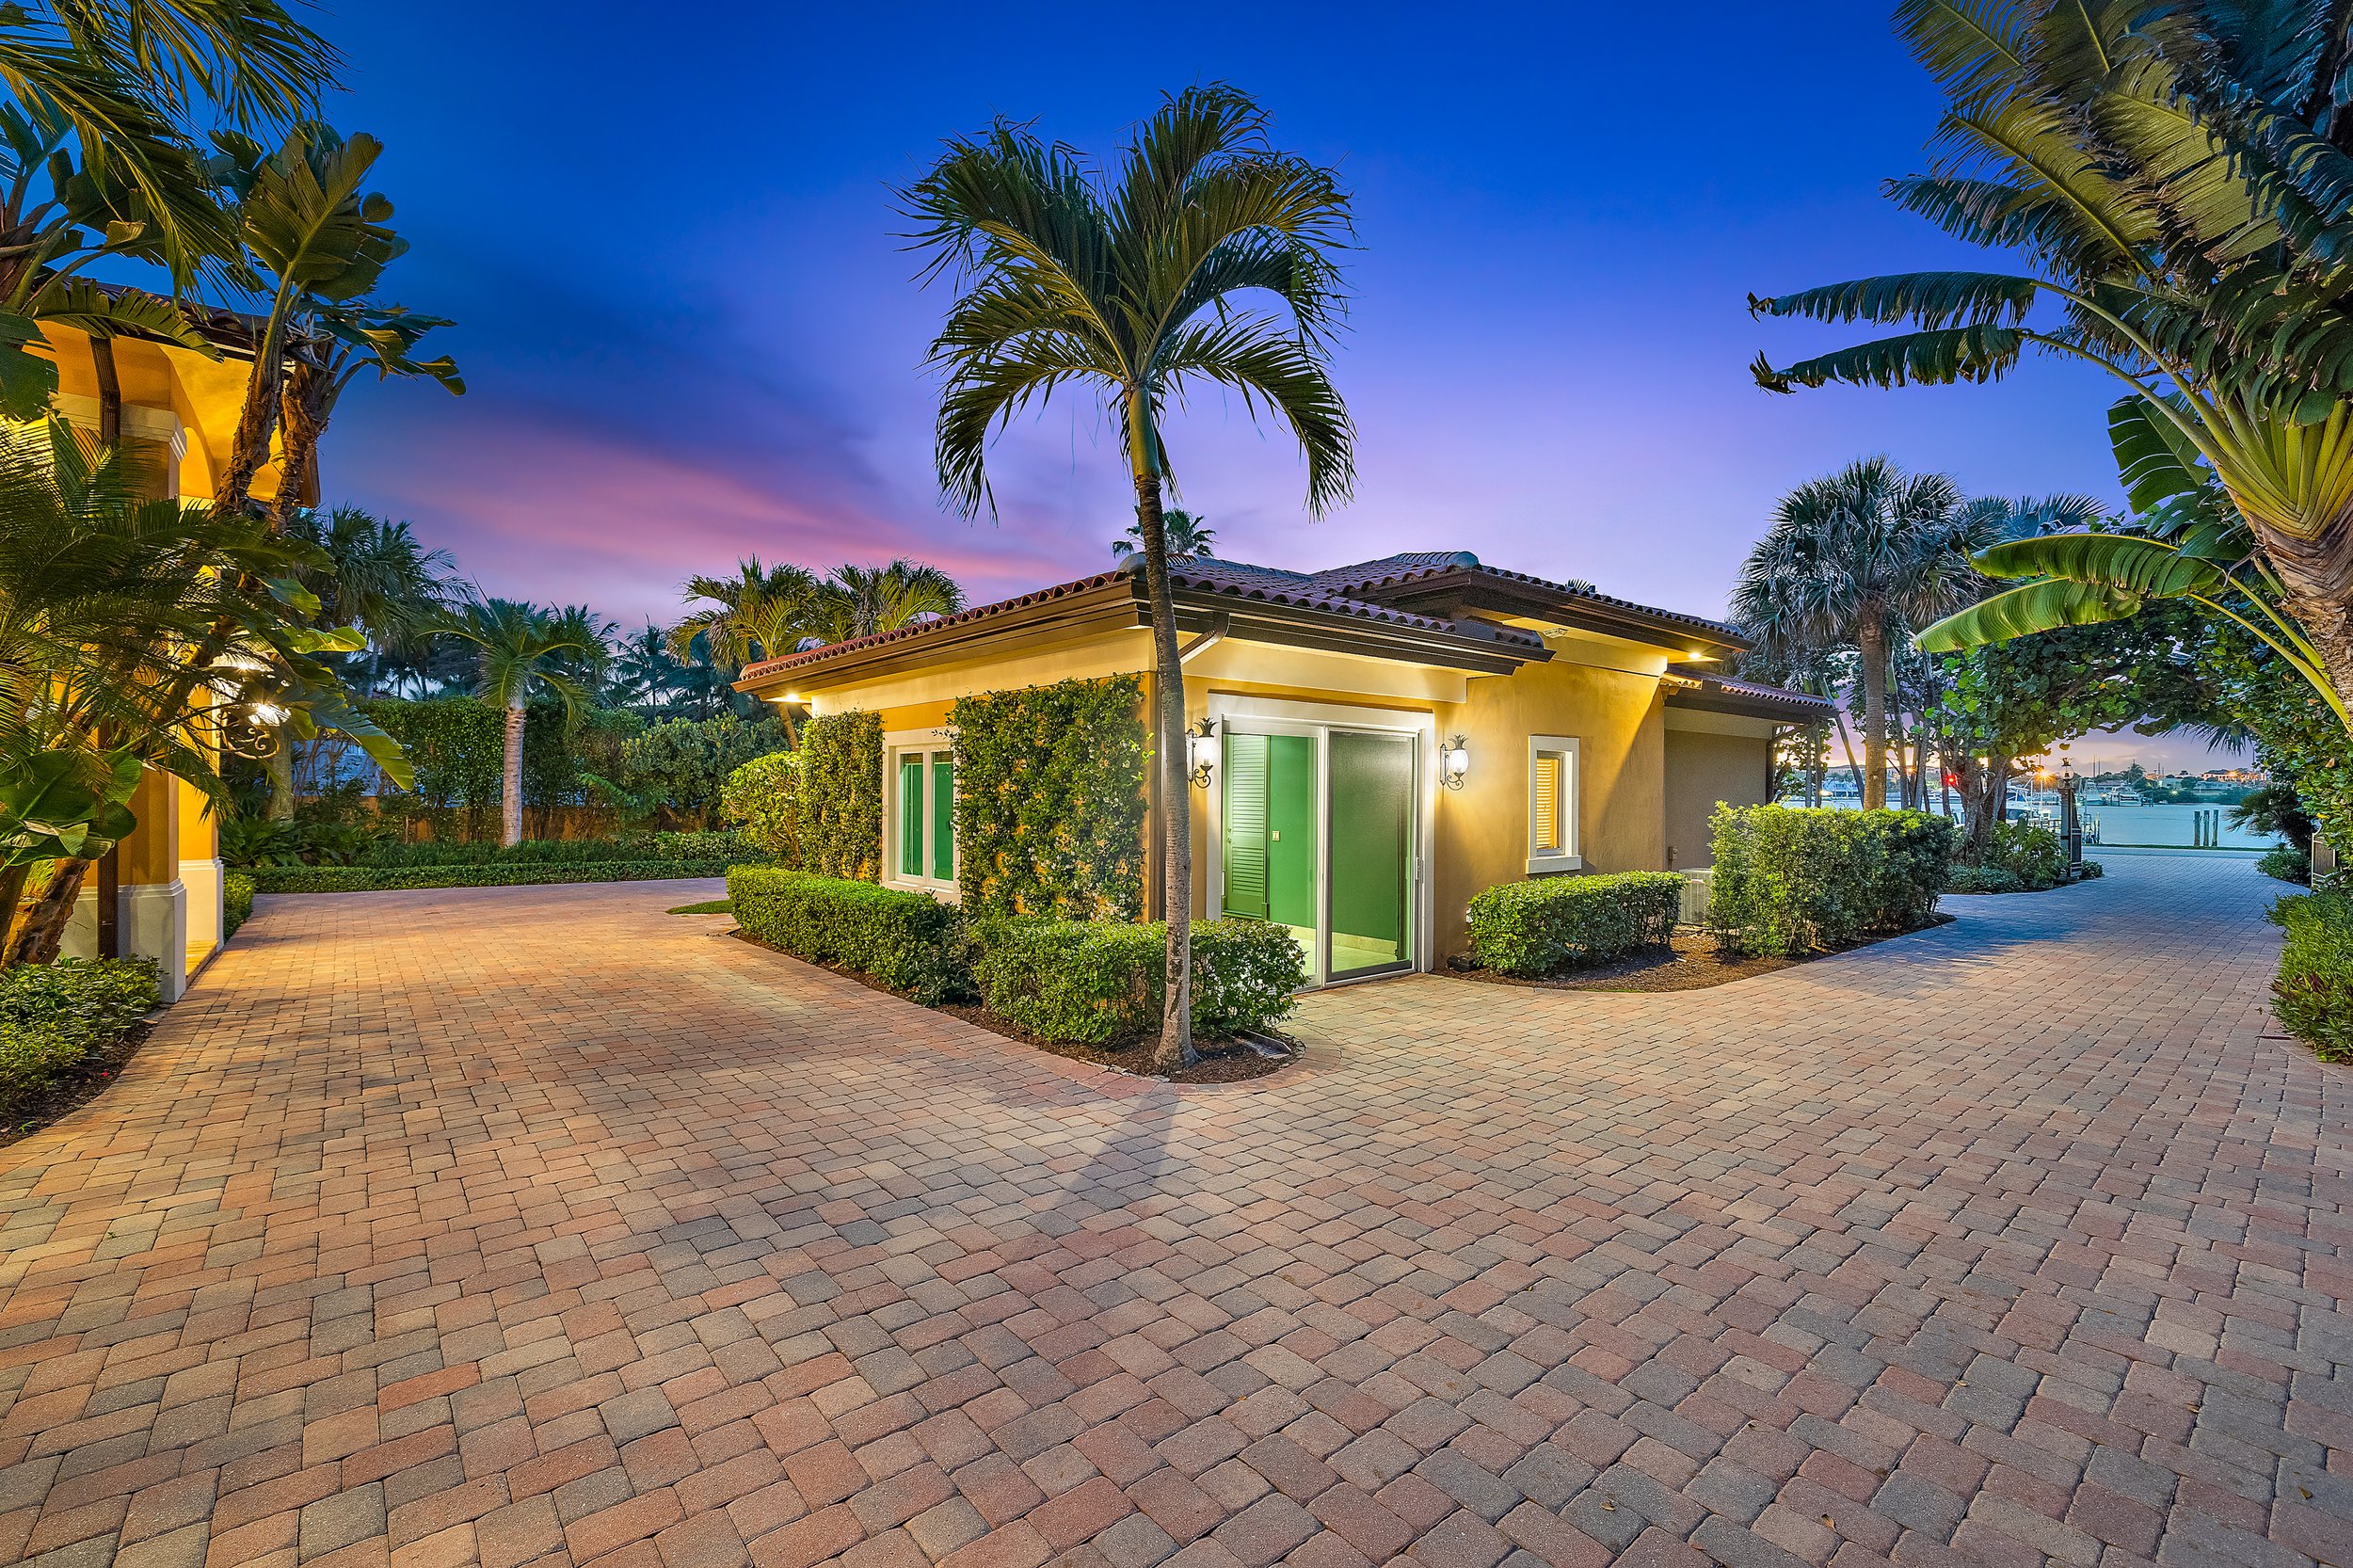 Tour A Jupiter Beachfront Mansion Owned By Clyde R. %22Buzz%22 Gibb Which Is Asking $24.9 Million 18.jpg